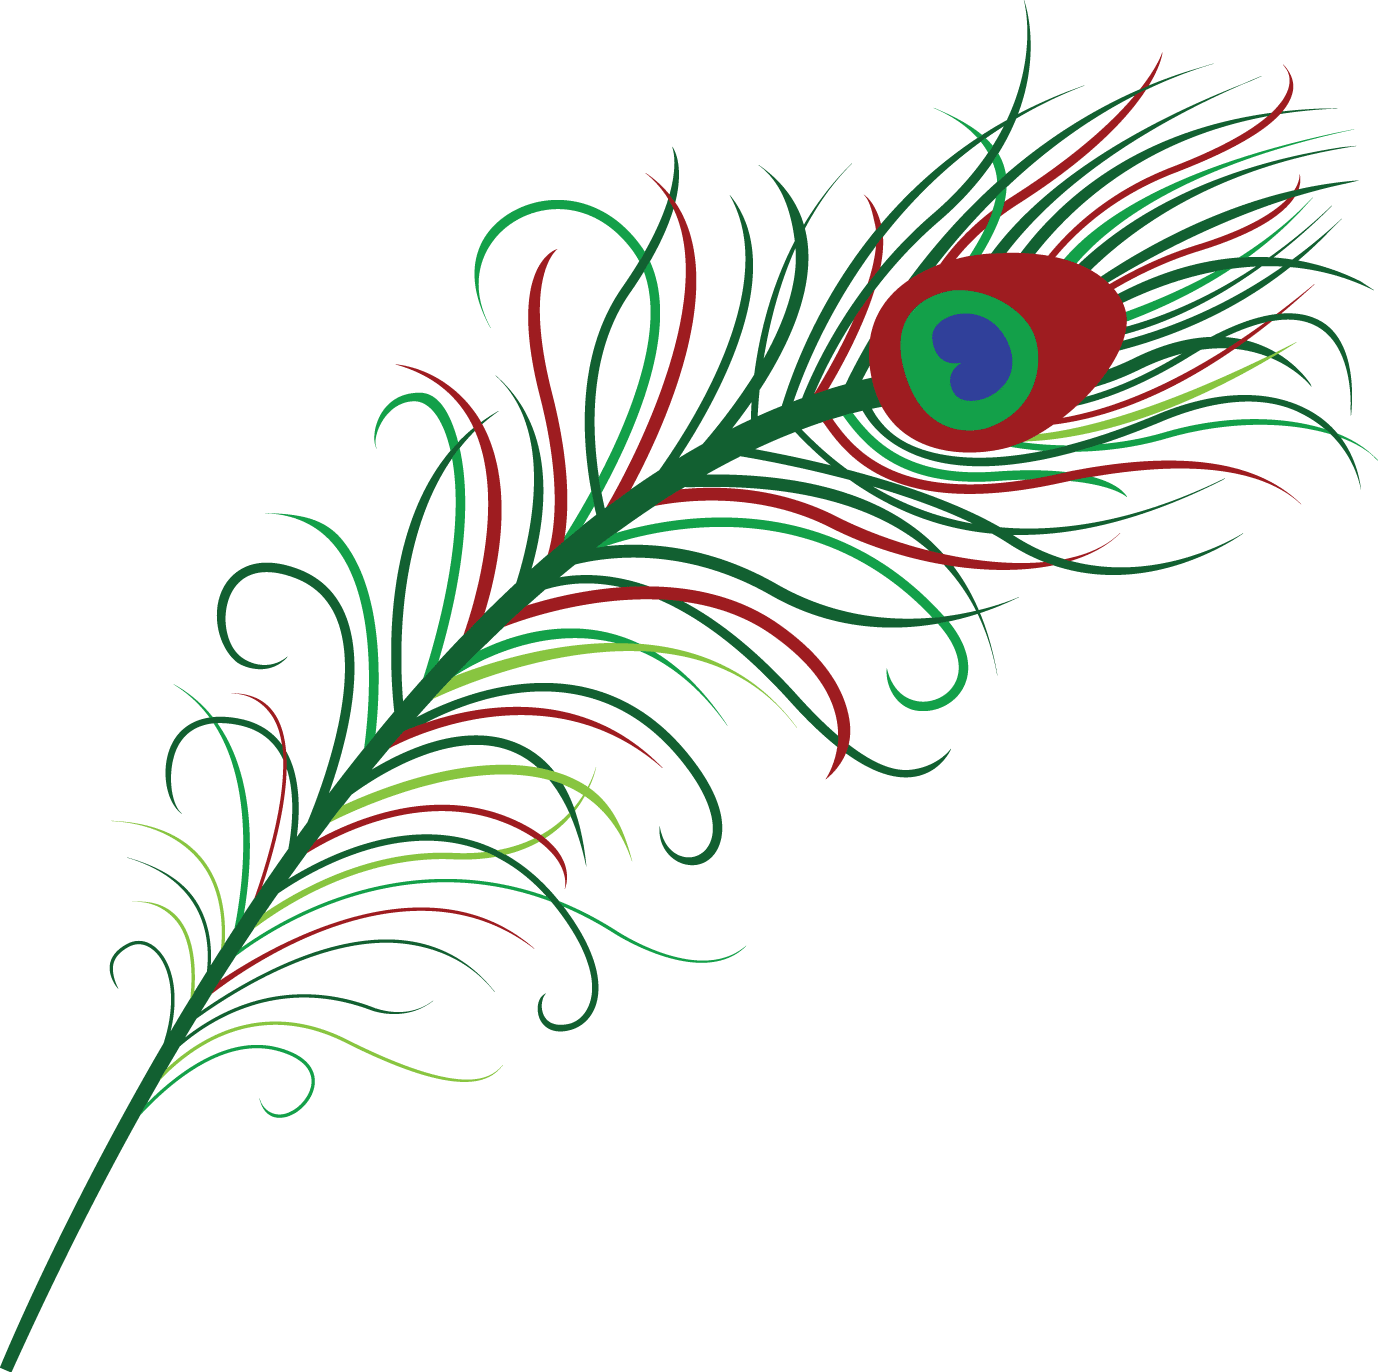 Peacock Feather Border Designs | Clipart Panda - Free Clipart Images